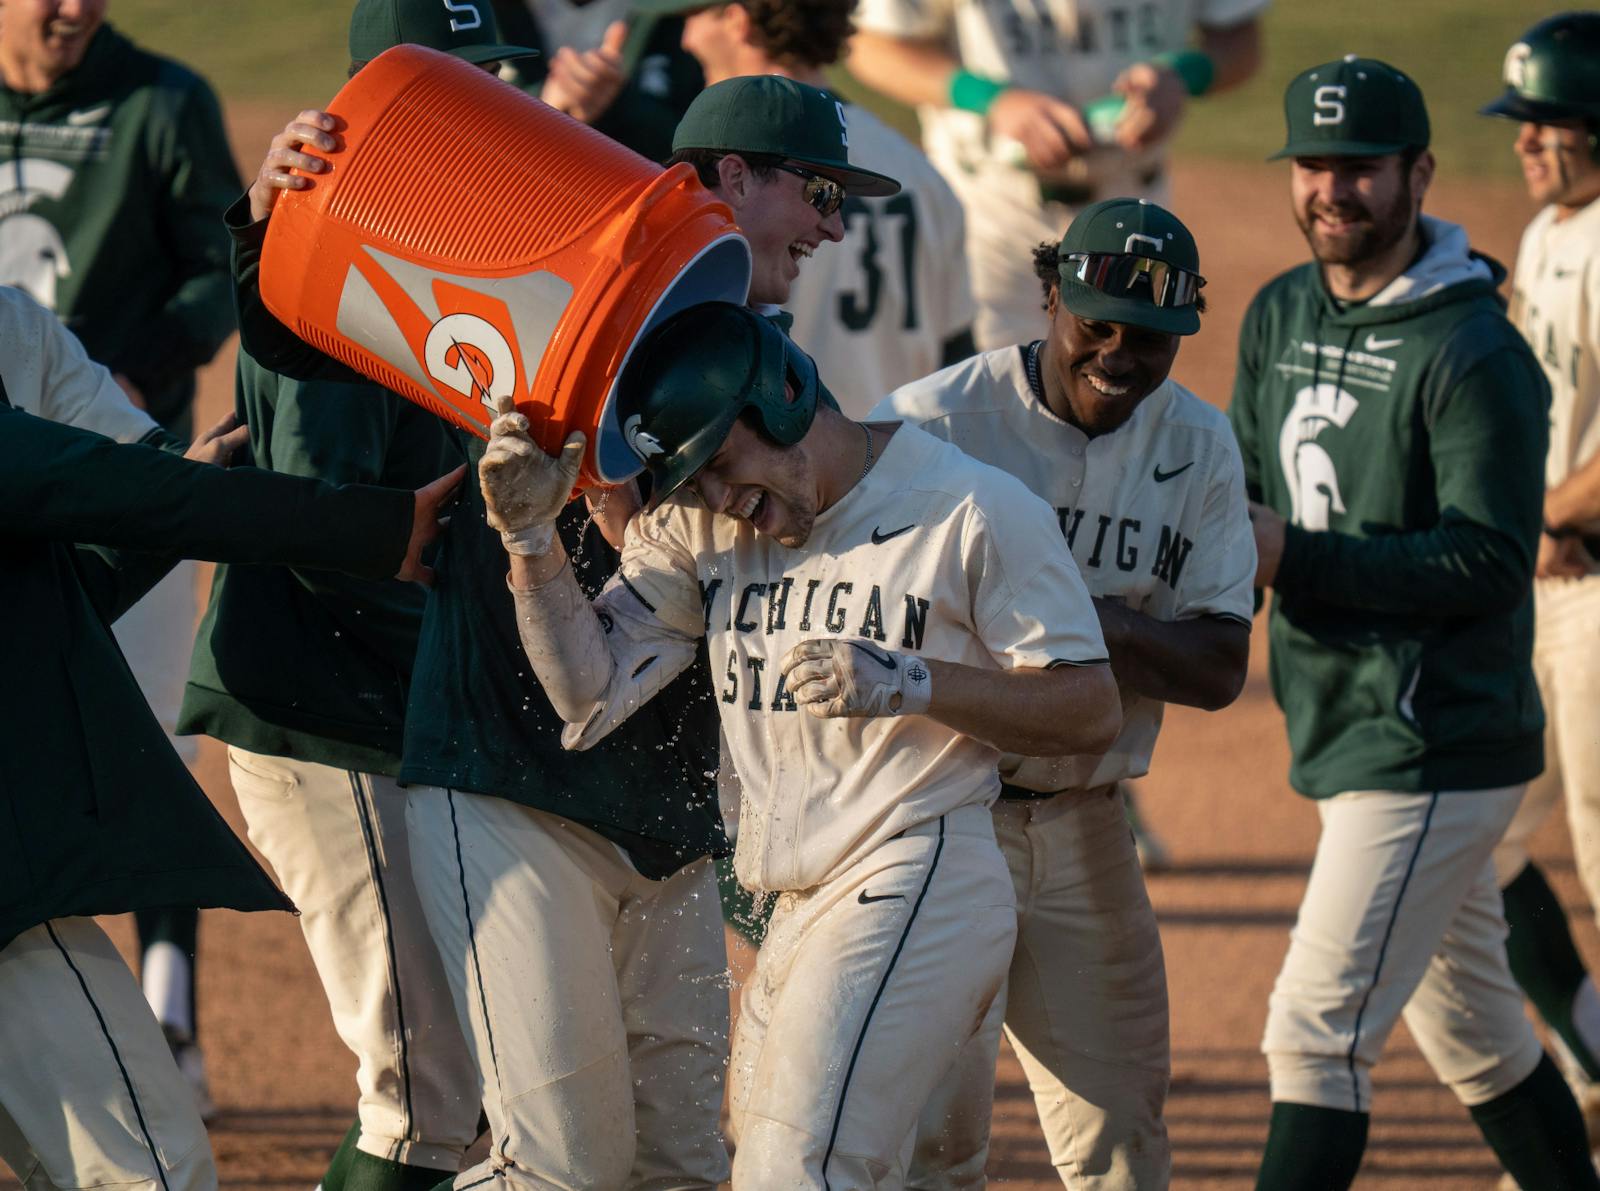 Michigan State baseball completes the sweep over Houston Baptist